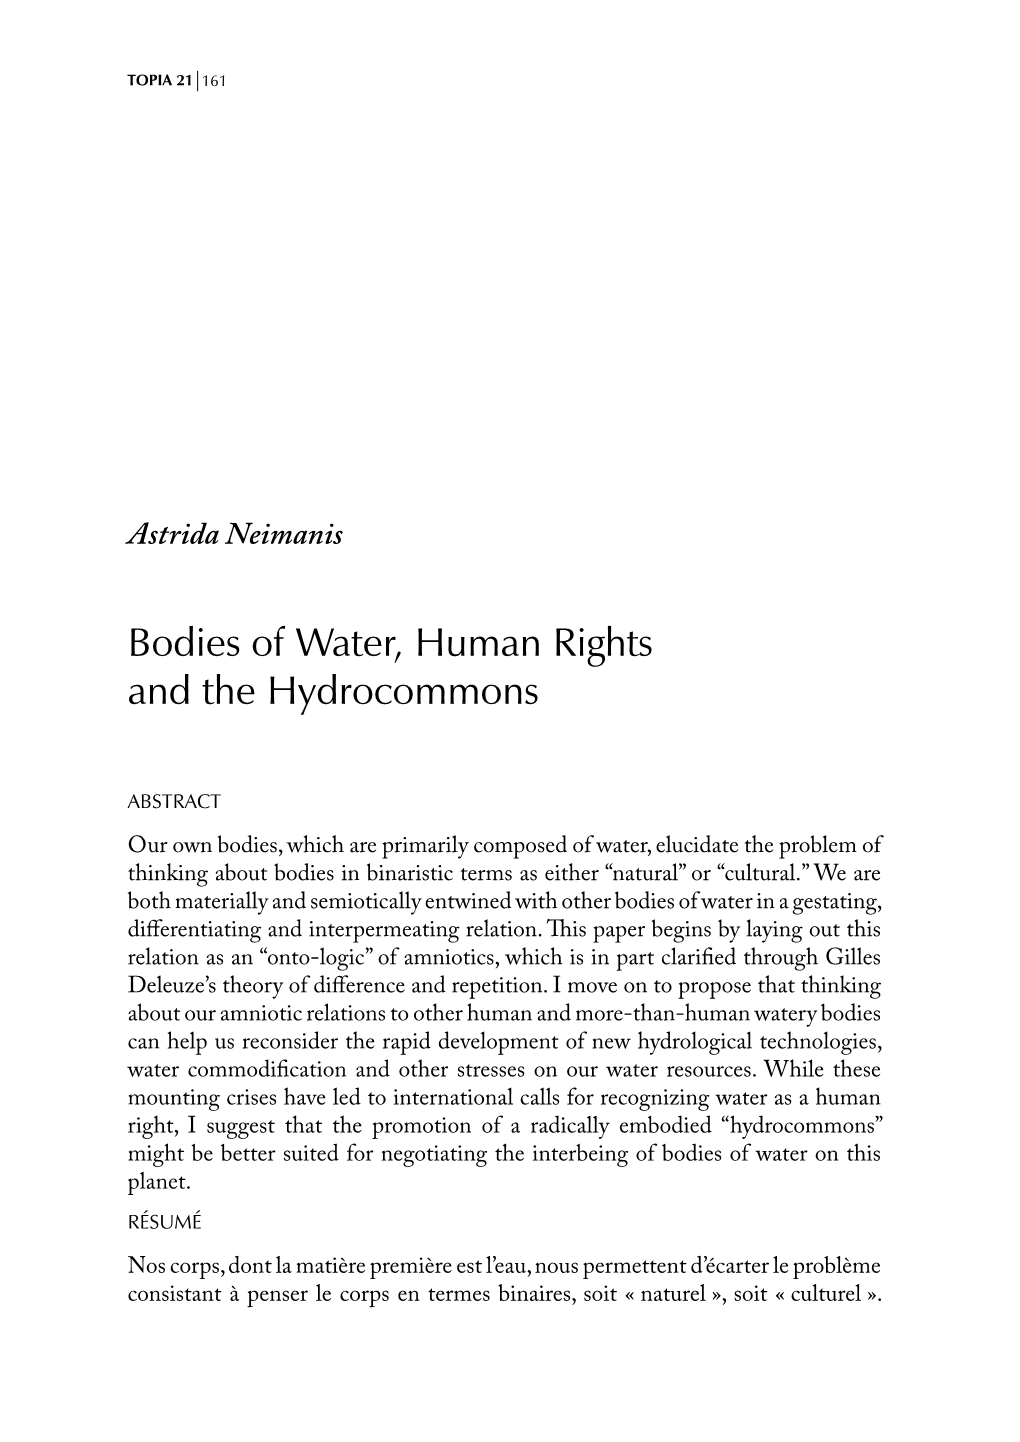 Bodies of Water, Human Rights and the Hydrocommons